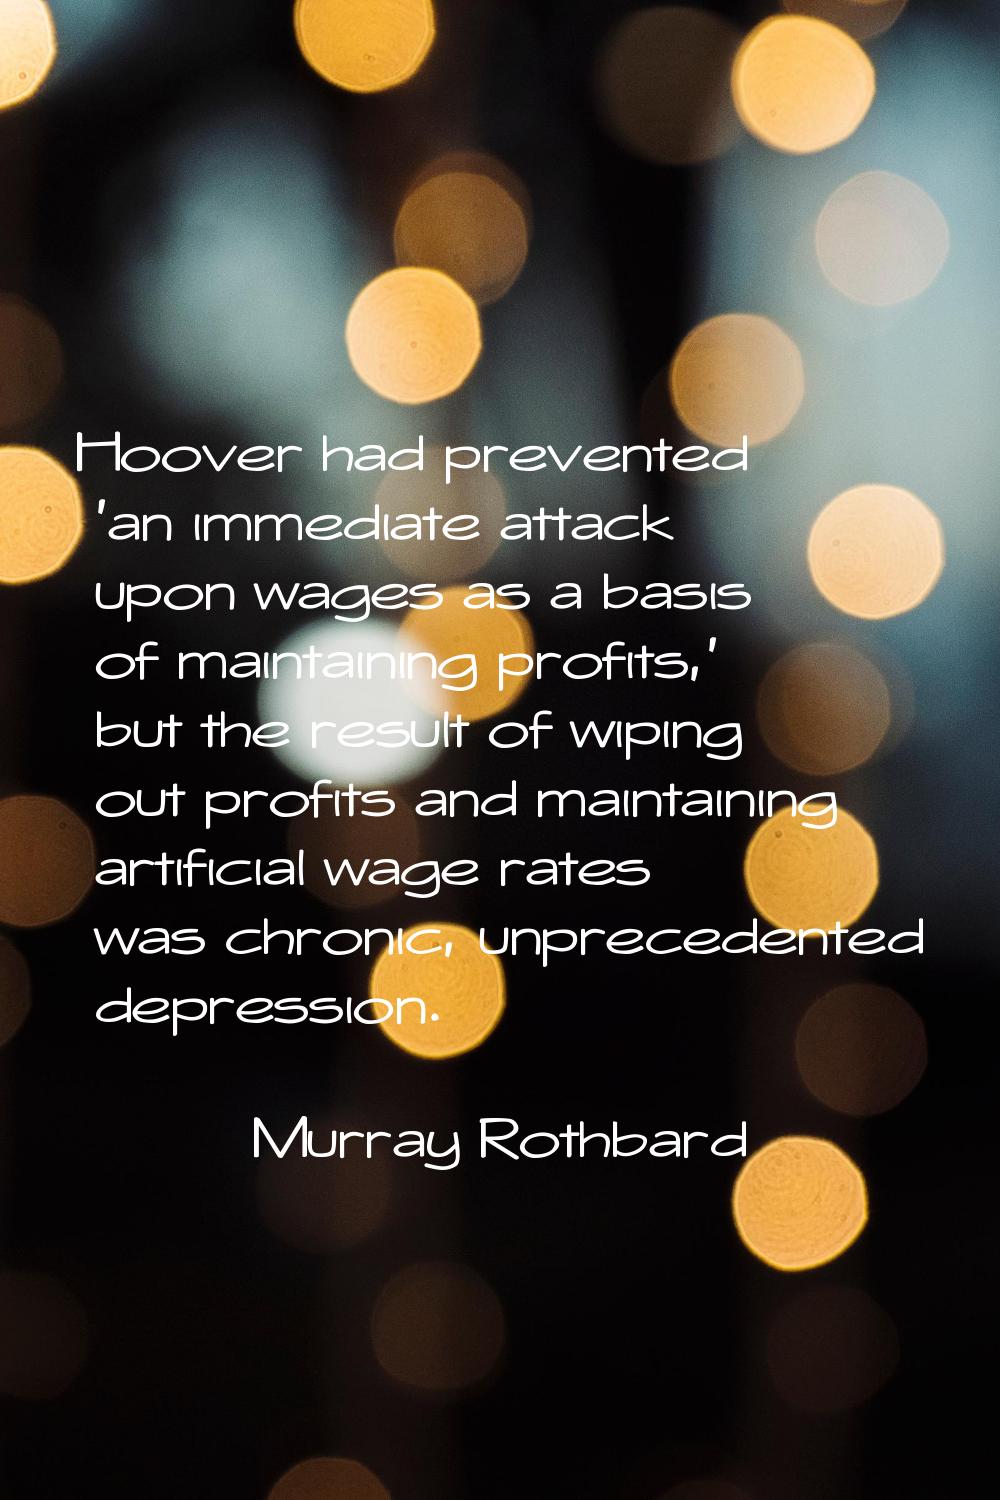 Hoover had prevented 'an immediate attack upon wages as a basis of maintaining profits,' but the re